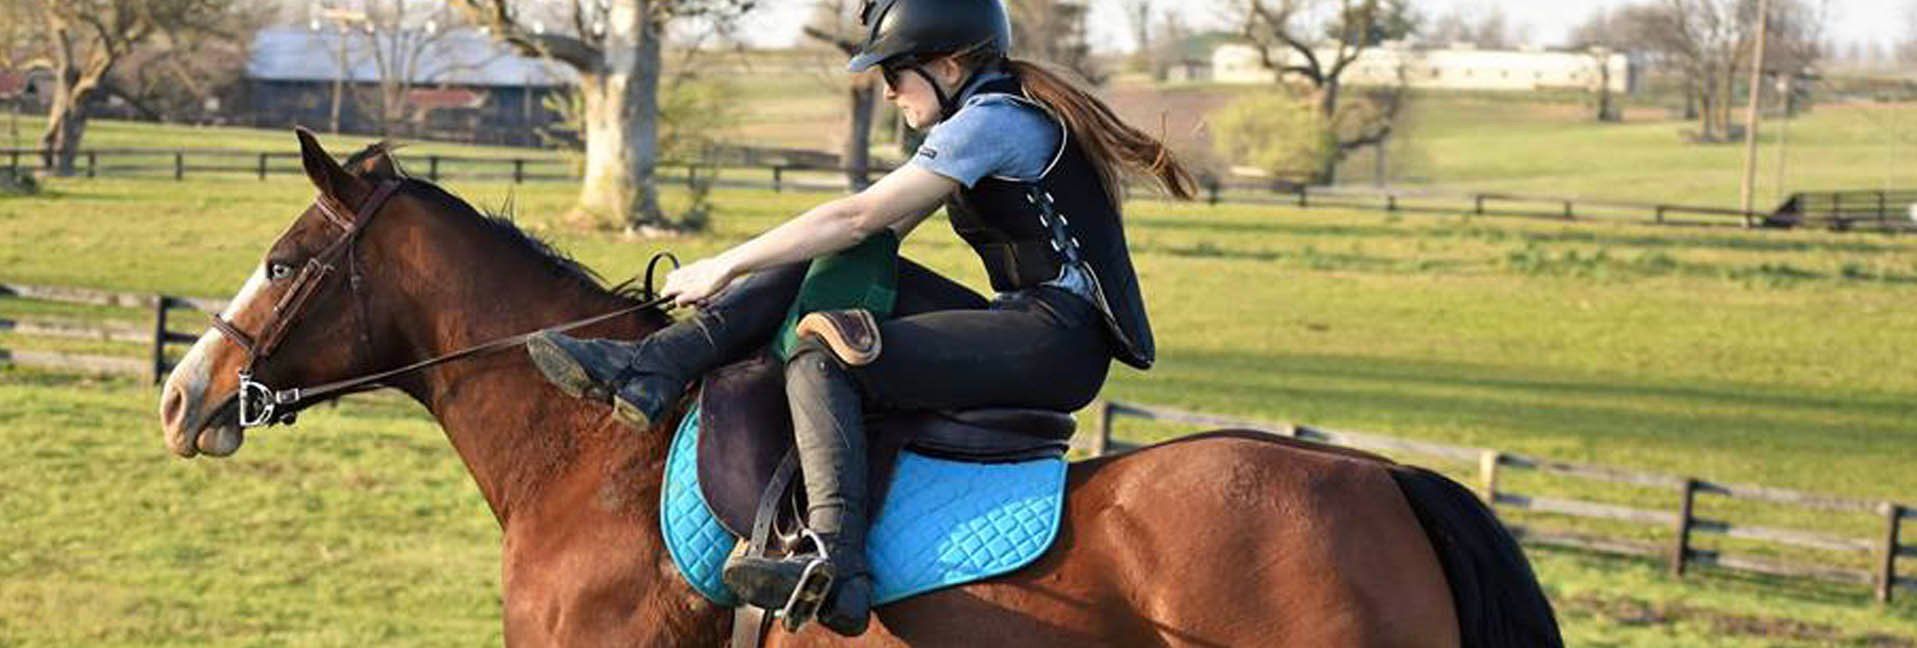 Riding Aside Versus Astride - A trip in a side saddle